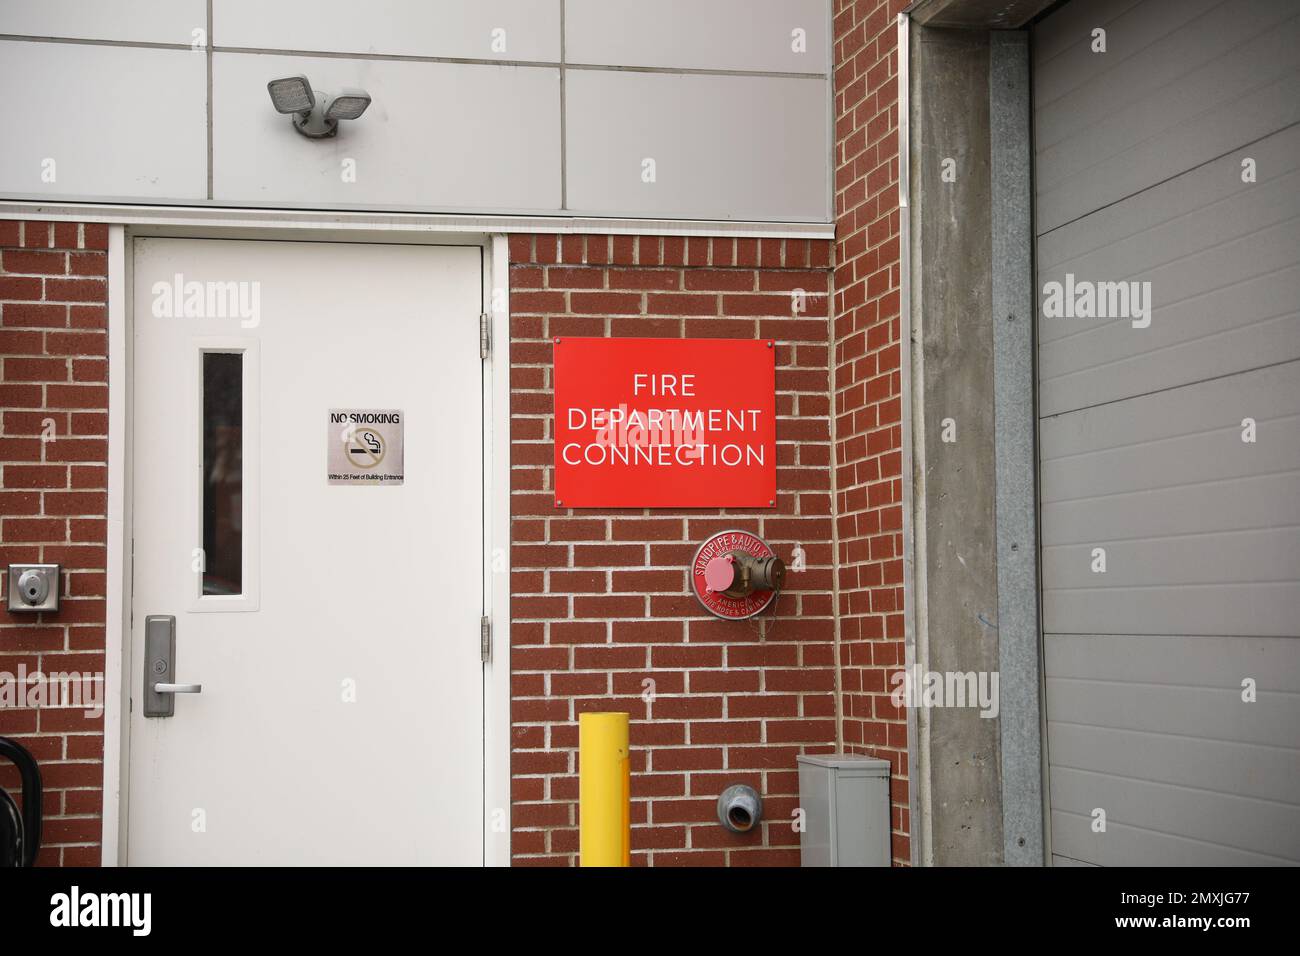 Fire alarm and department warning signs Stock Photo